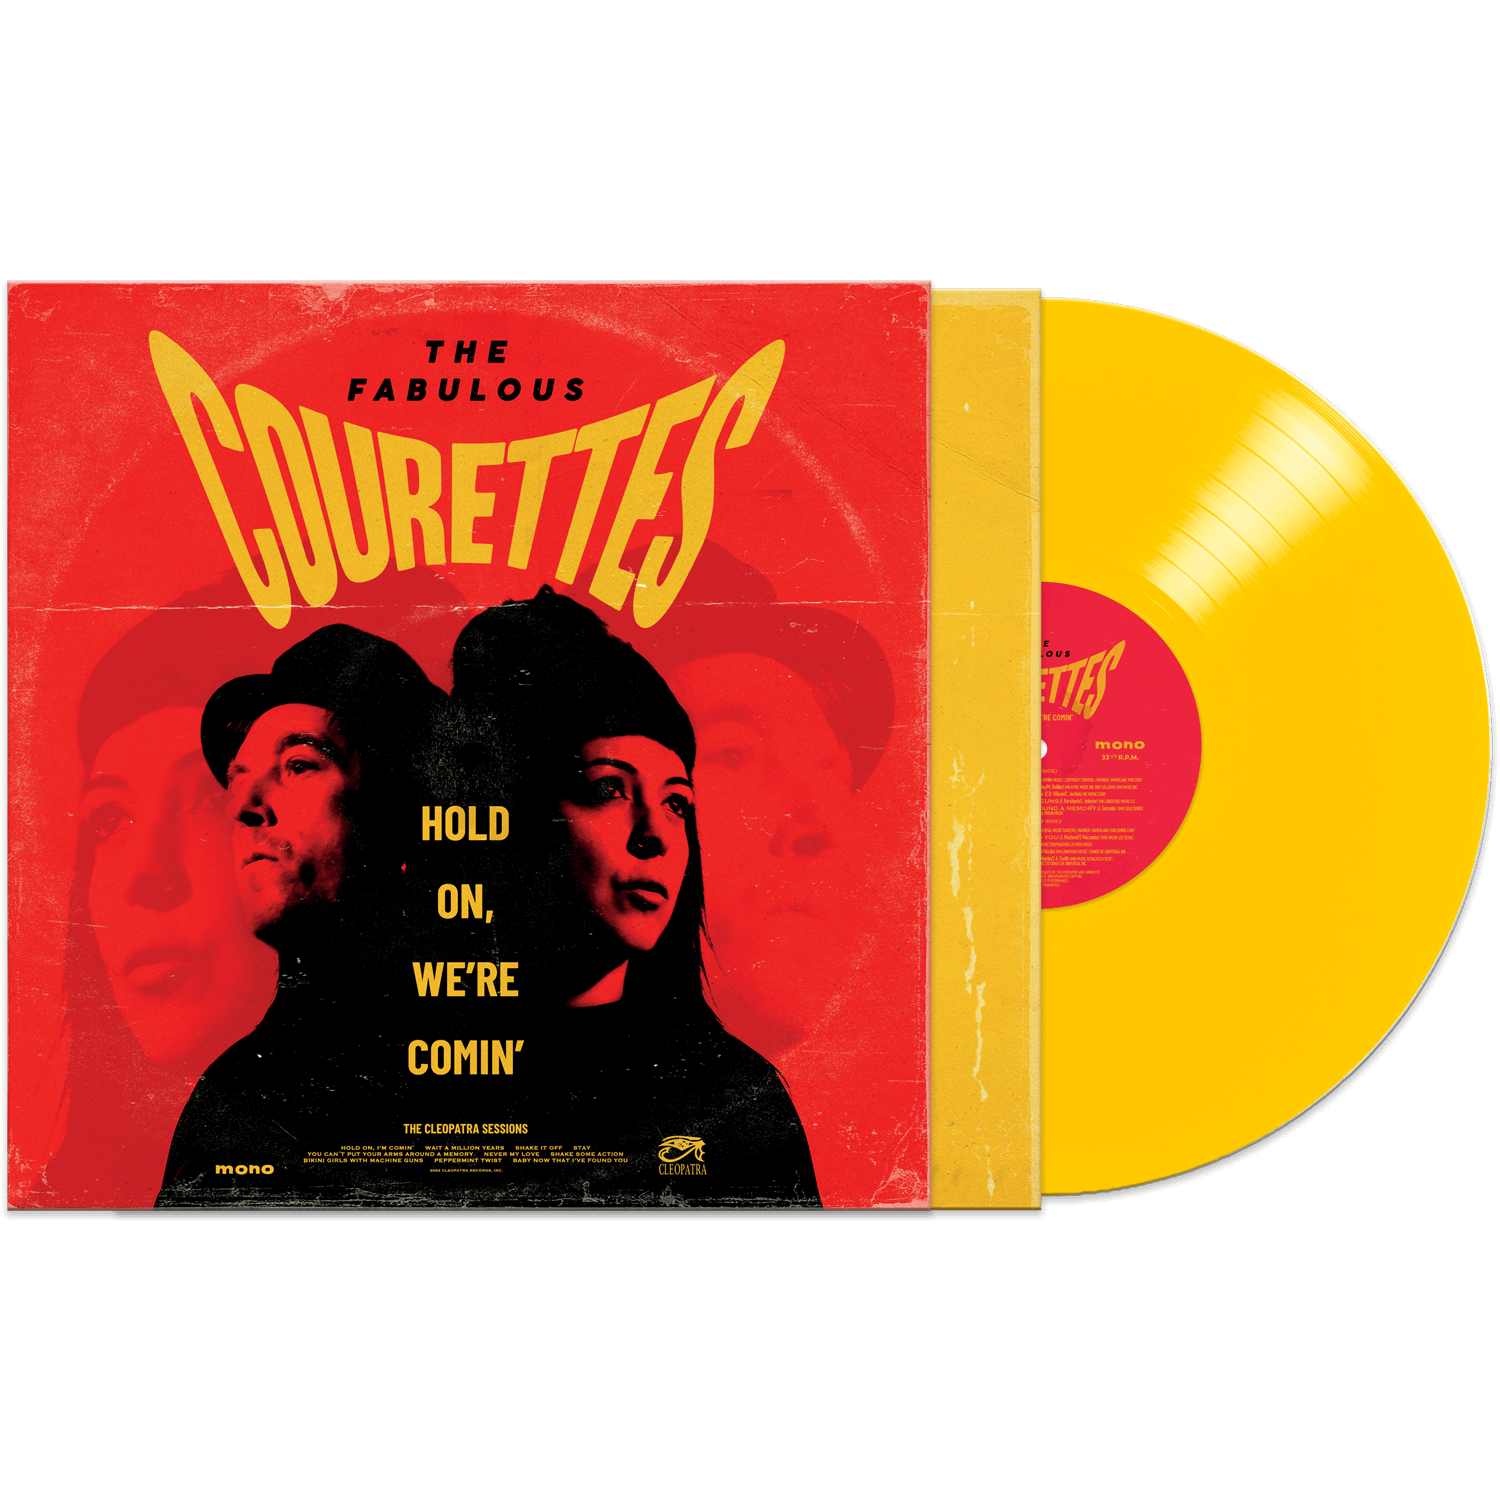 The Courettes - Hold On, We're Comin' (Yellow Vinyl)